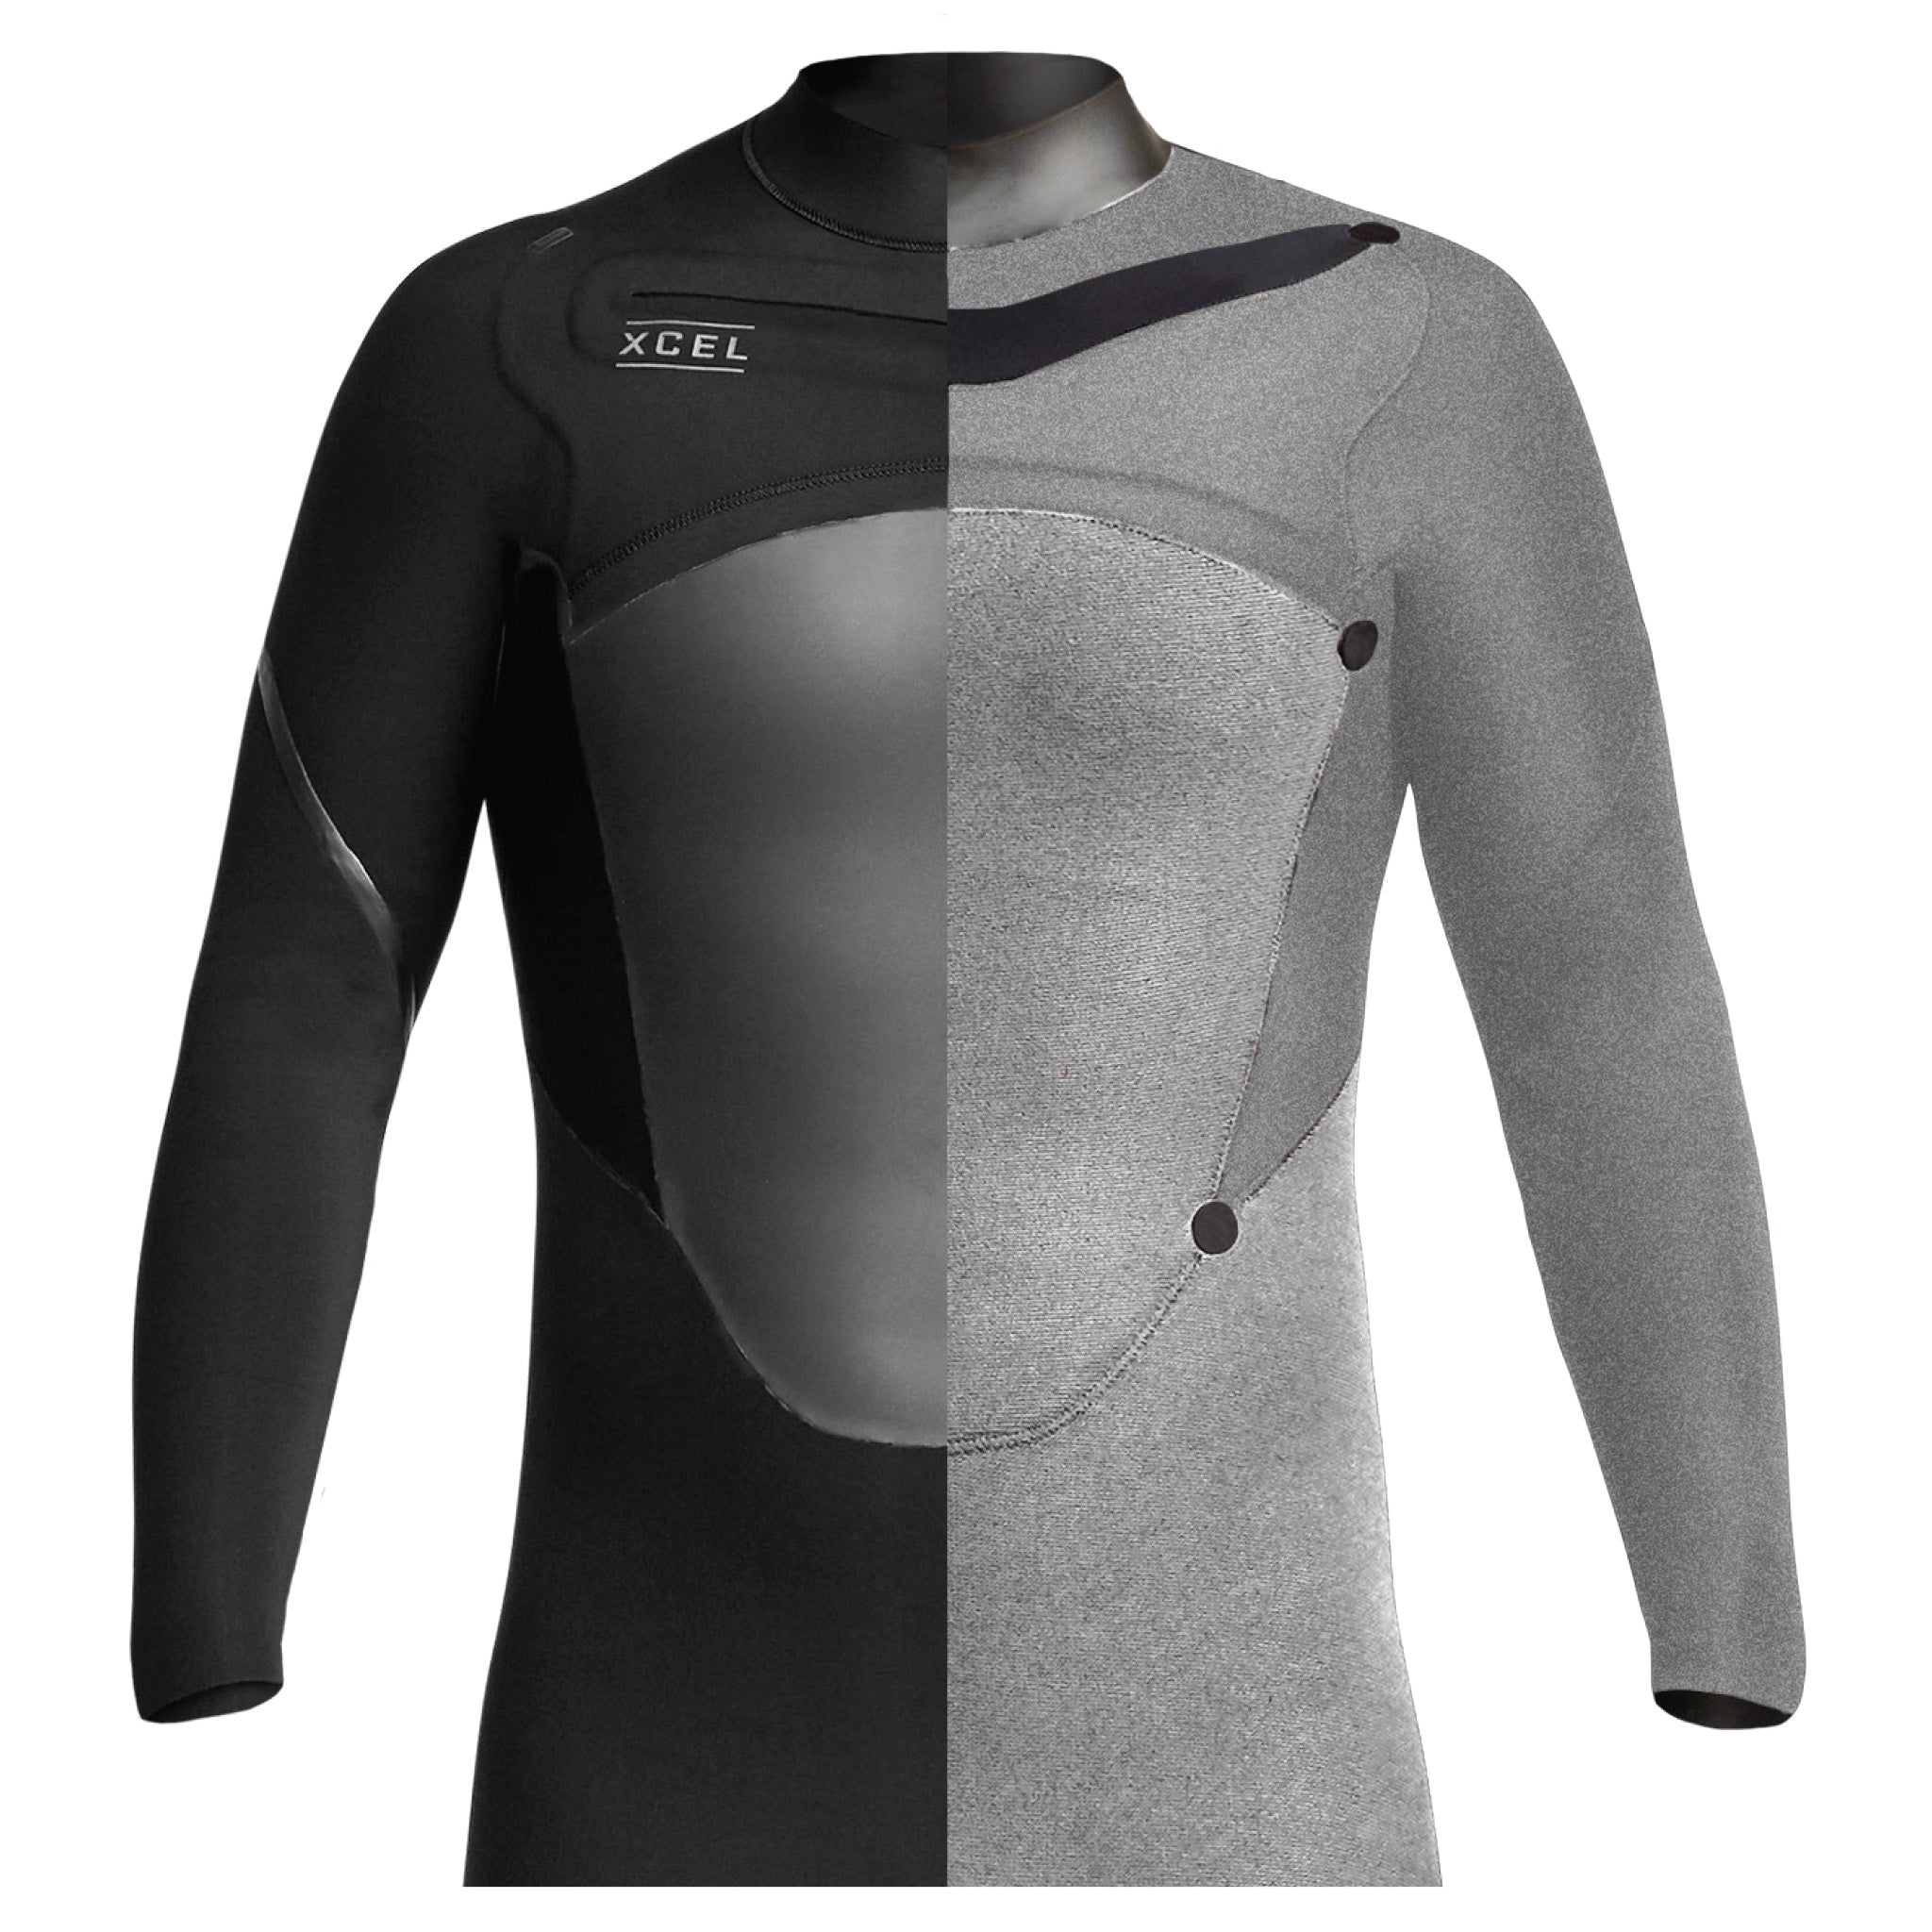 Xcel Axis X Wetsuit cross-section